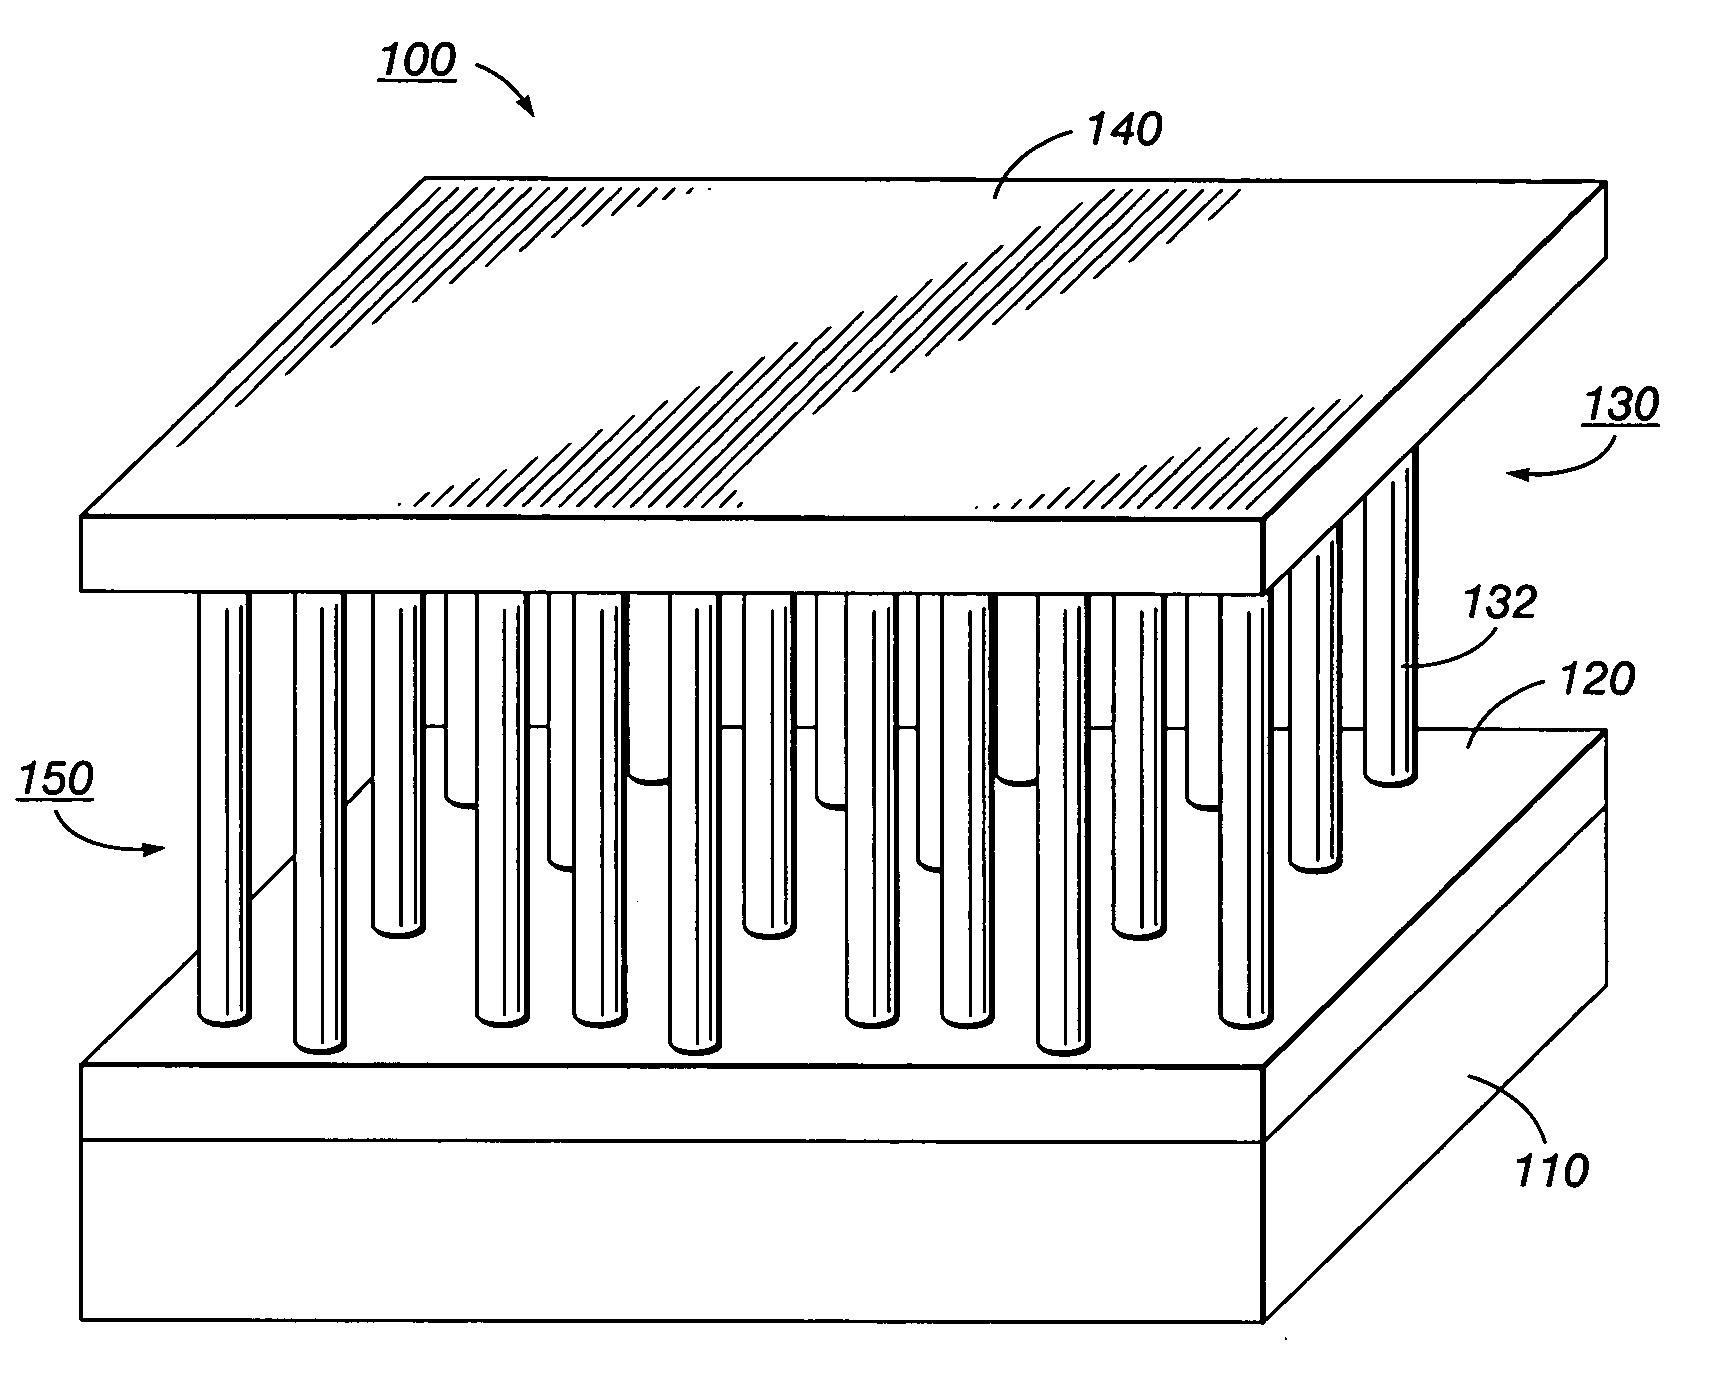 Systems and methods for electrical contacts to arrays of vertically aligned nanorods